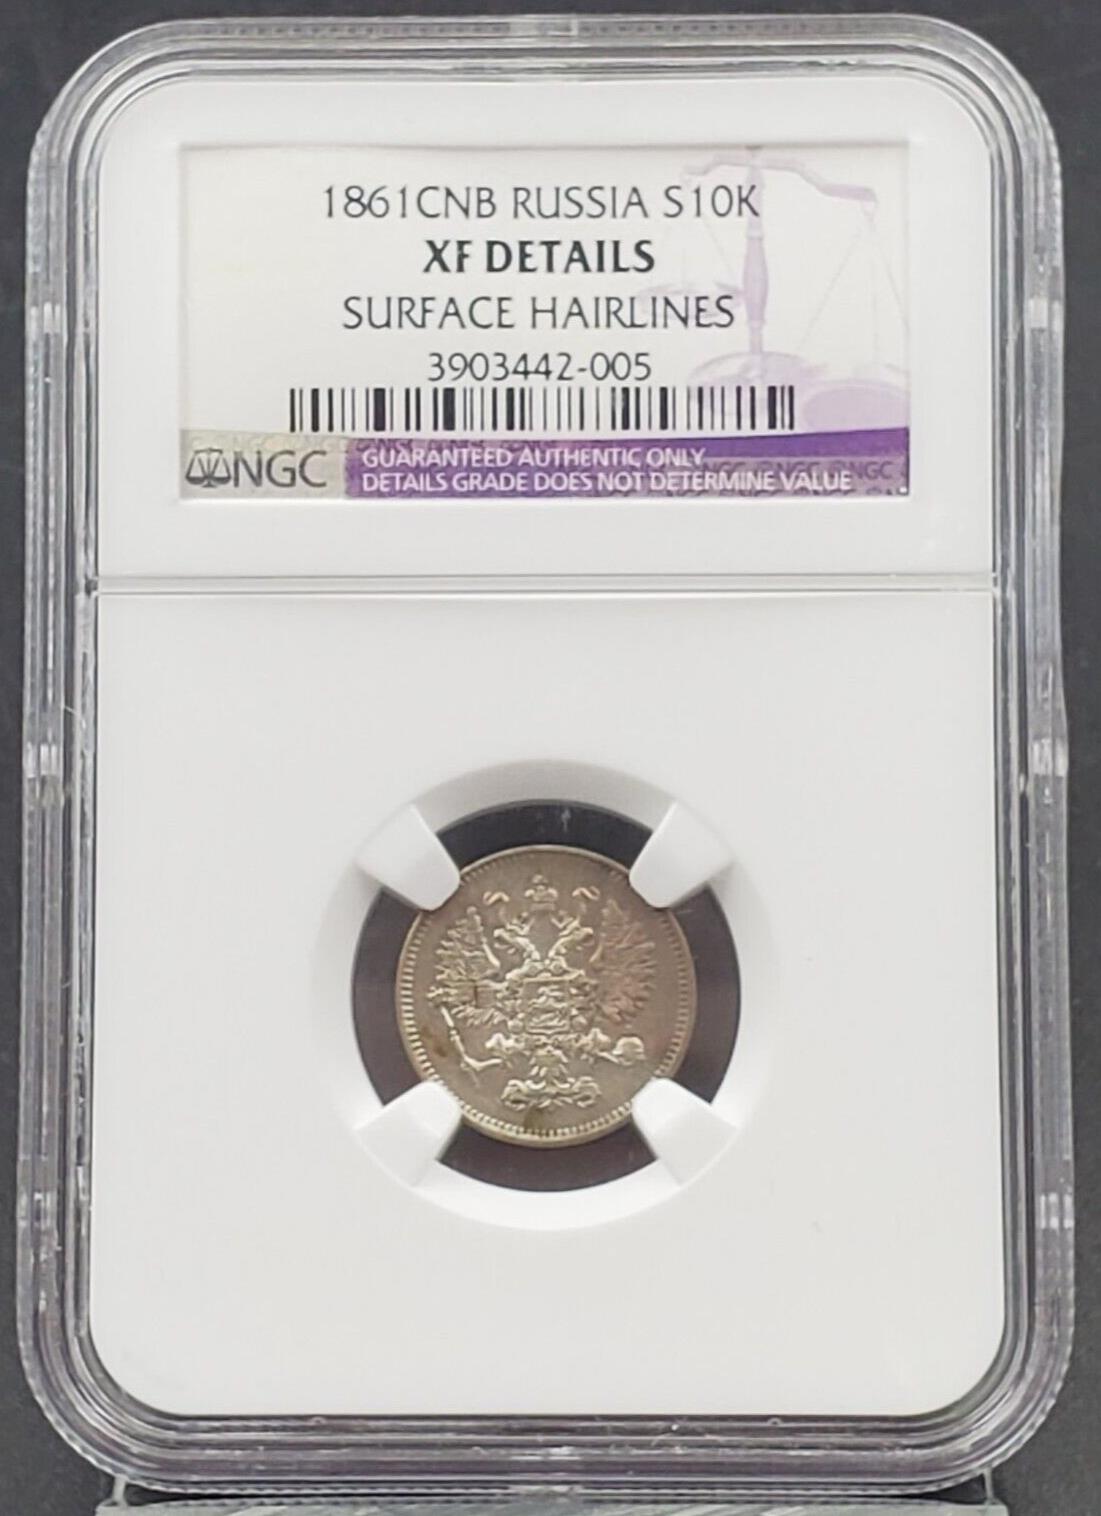 1861 CNB RUSSIA TEN KOPEKS NGC XF Details Surface Hairlines SILVER Coin